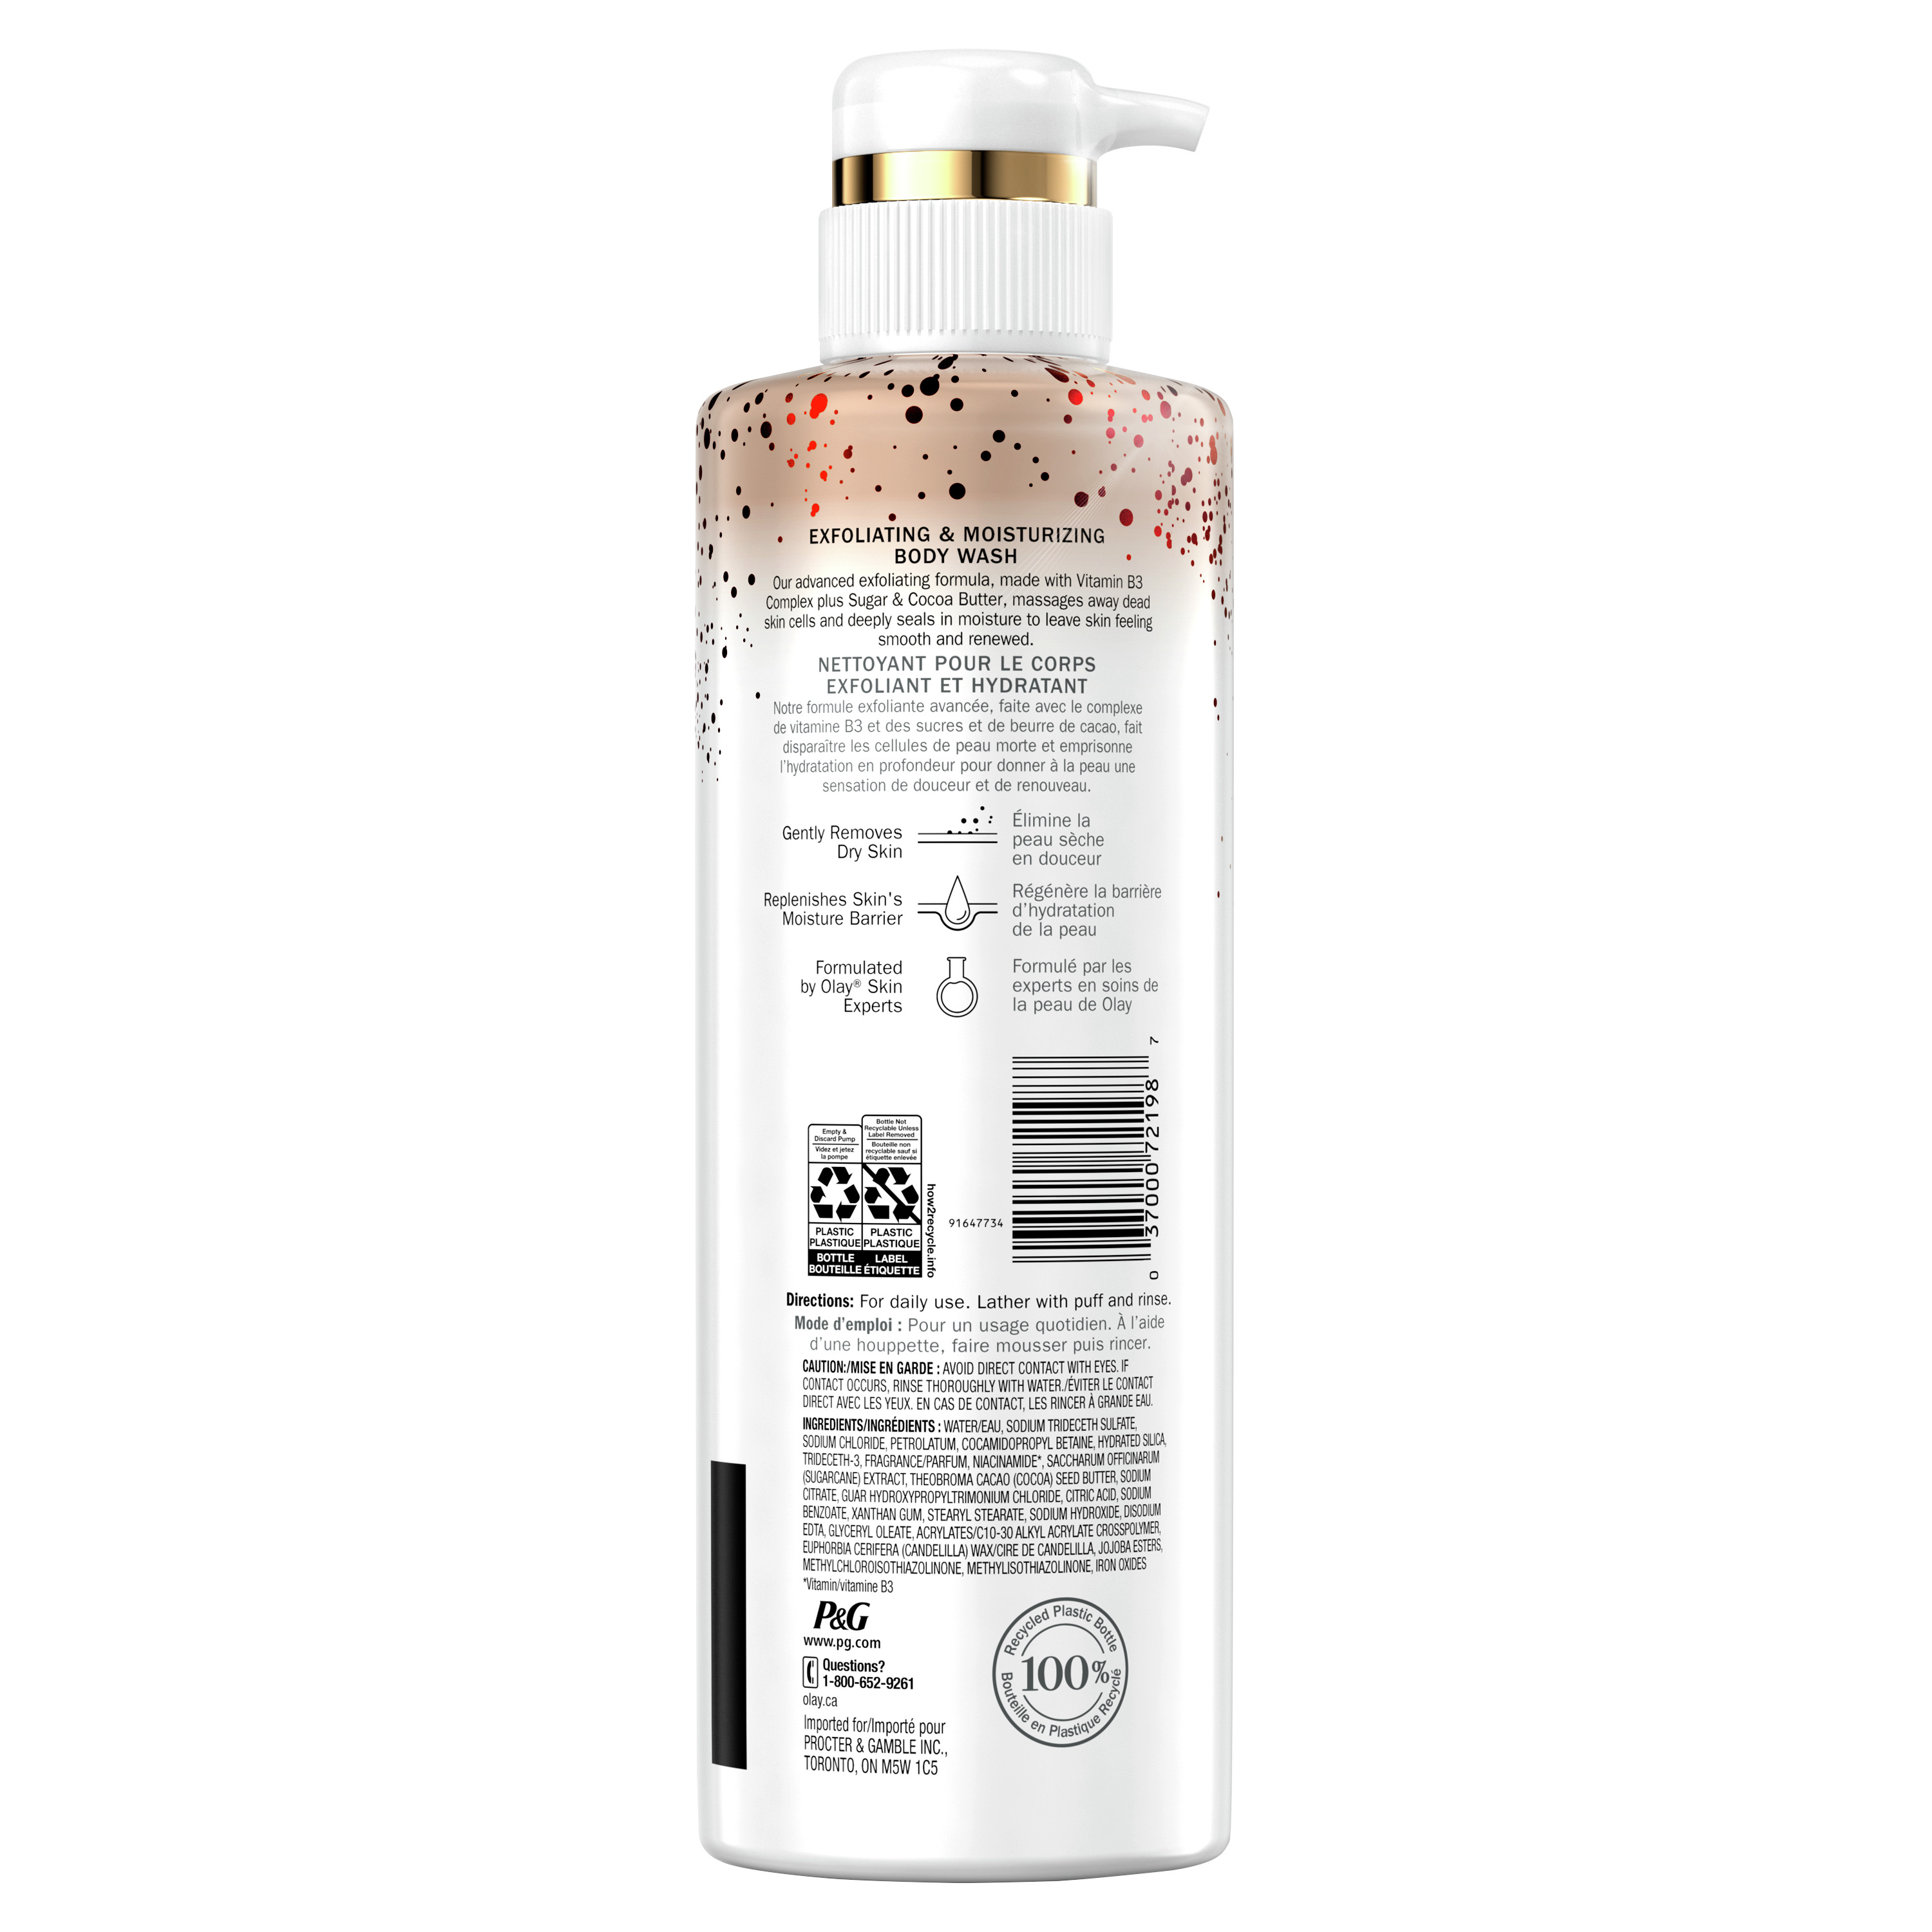 Olay Exfoliating & Moisturizing Body Wash with Sugar, Cocoa Butter and Vitamin B3